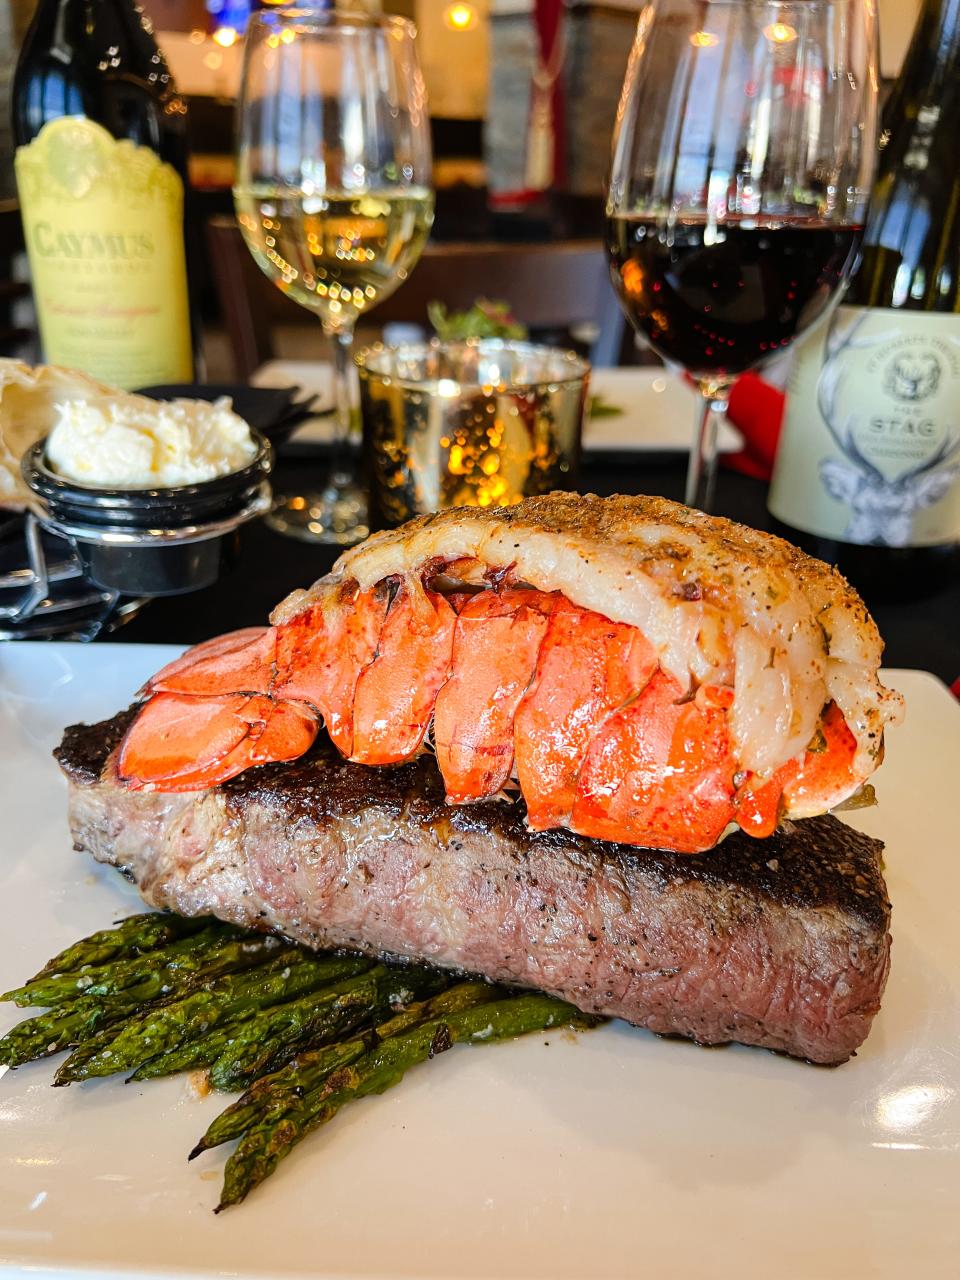 Want surf with your turf? Prime 239 Steakhouse incurs a $23 upcharge for topping it with a 6 oz. lobster tail.